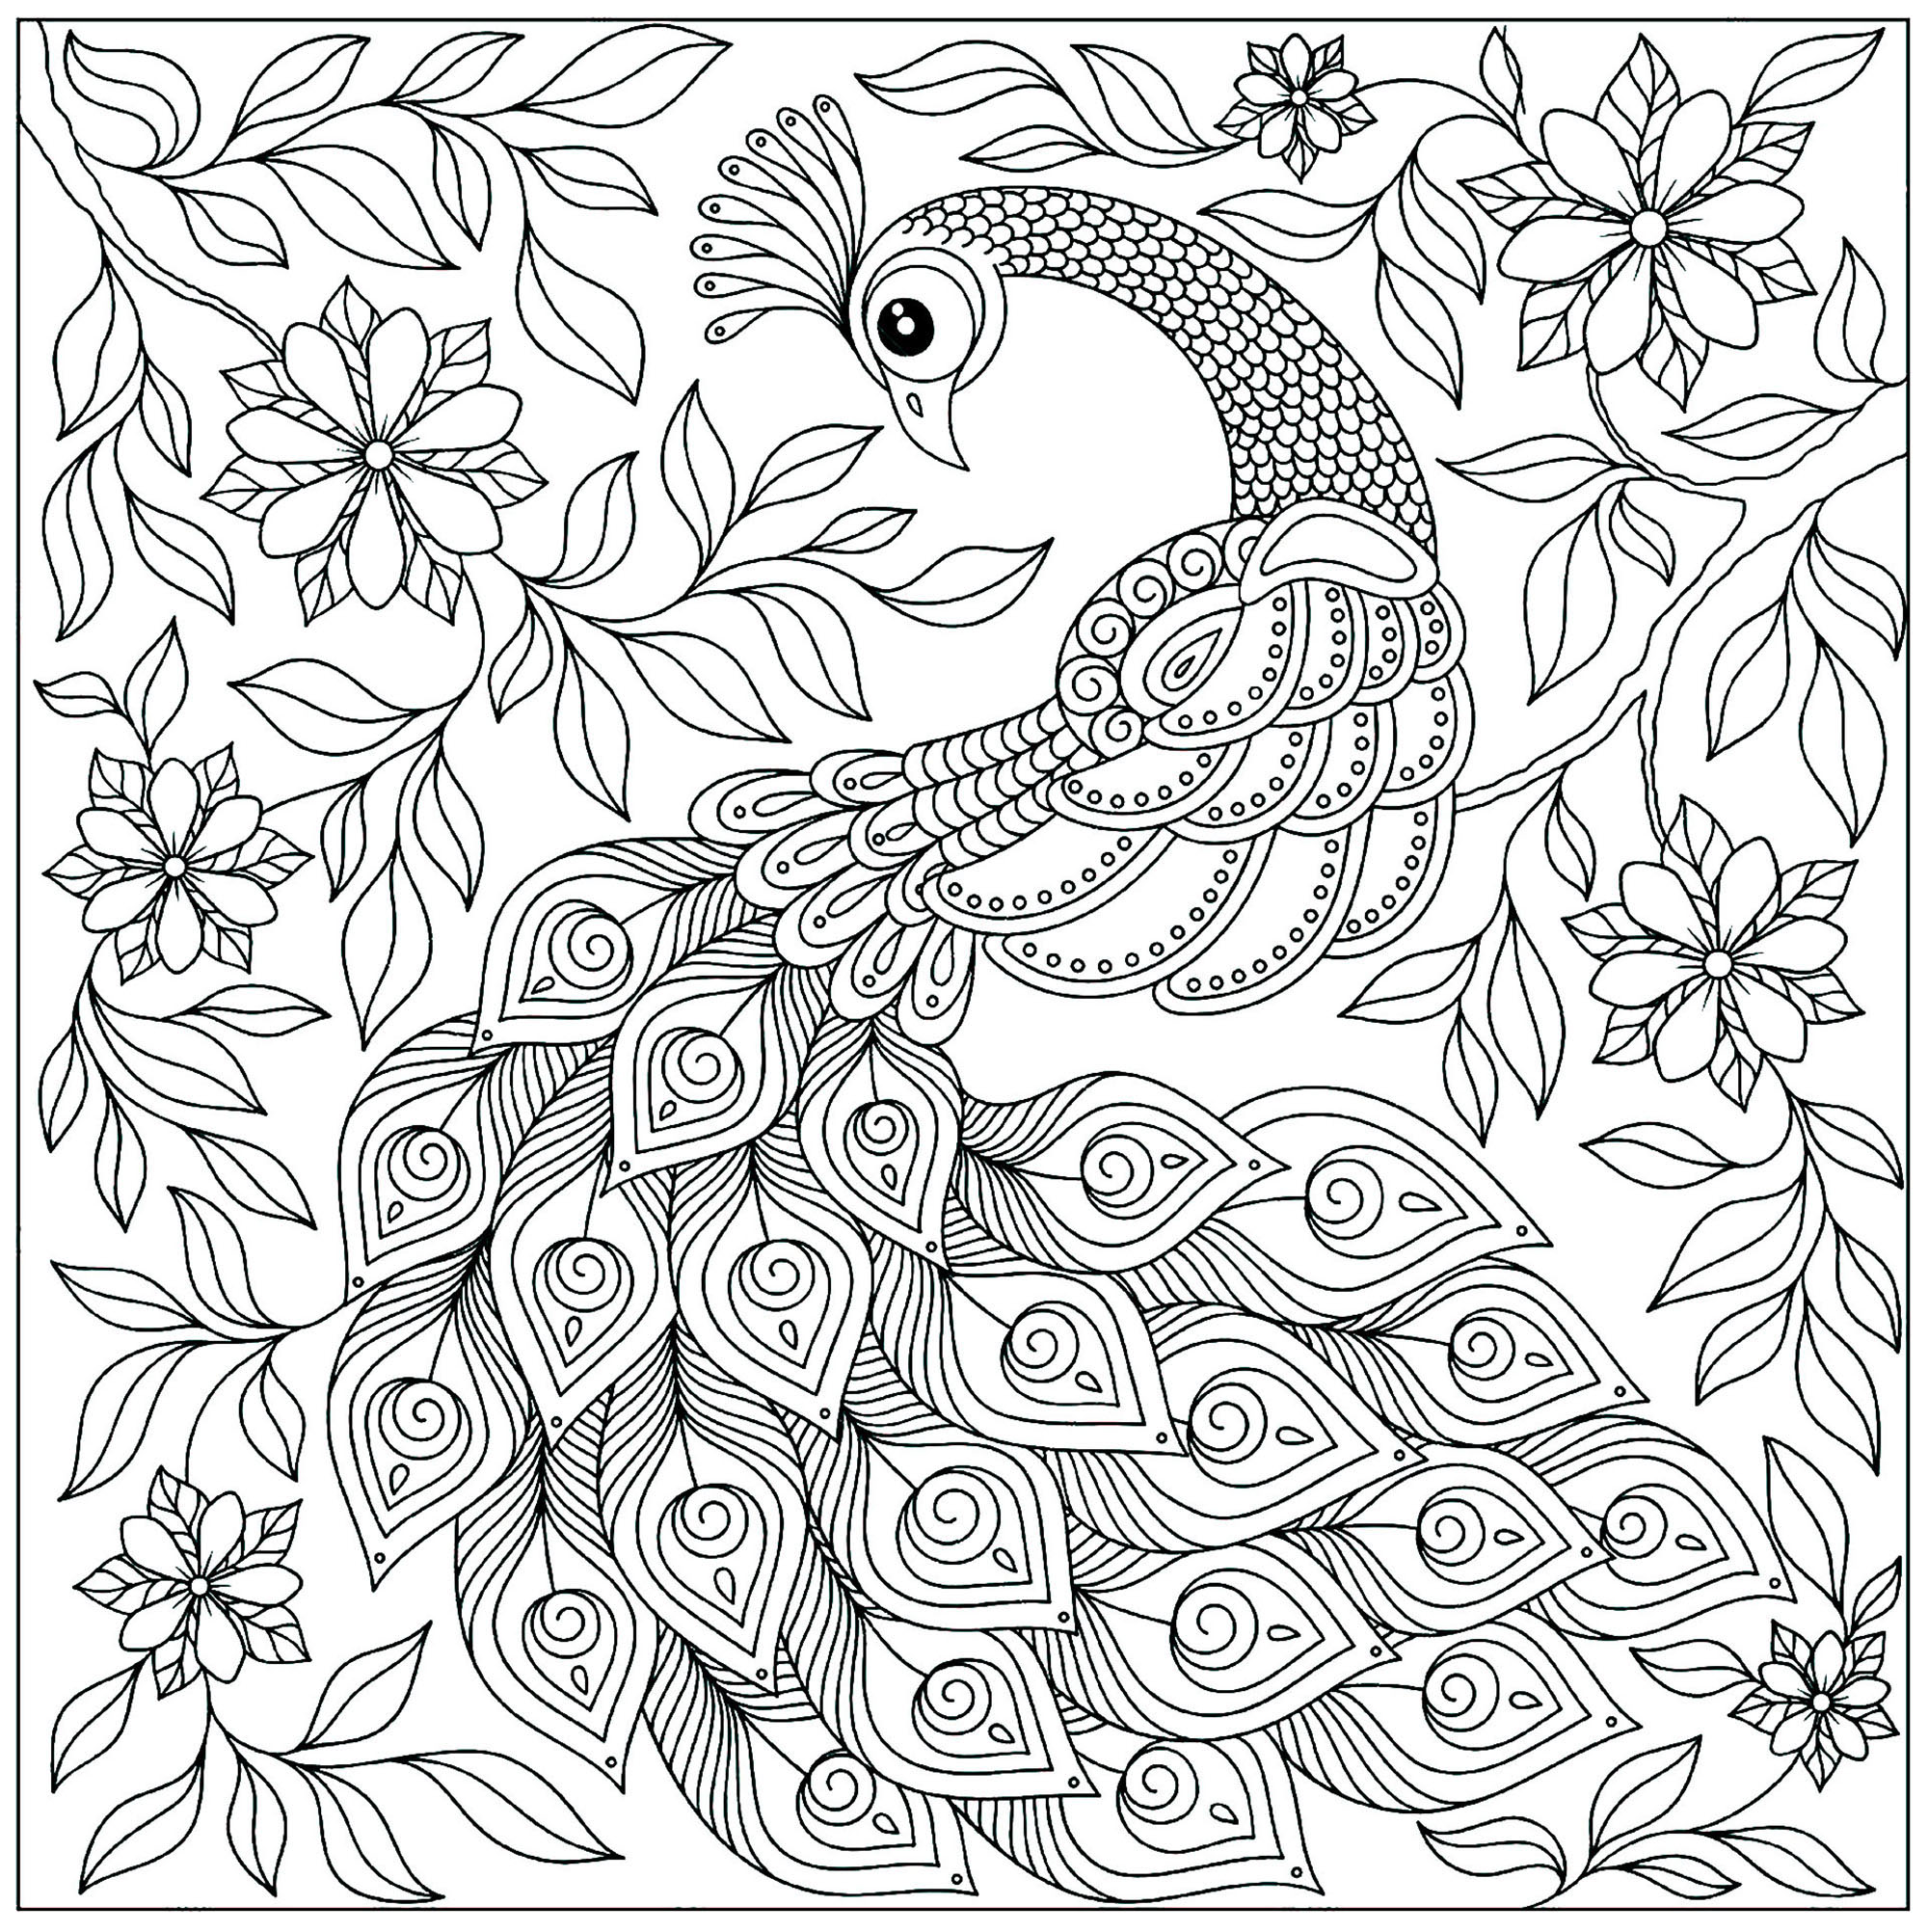 Peacocks to print - Peacocks Kids Coloring Pages